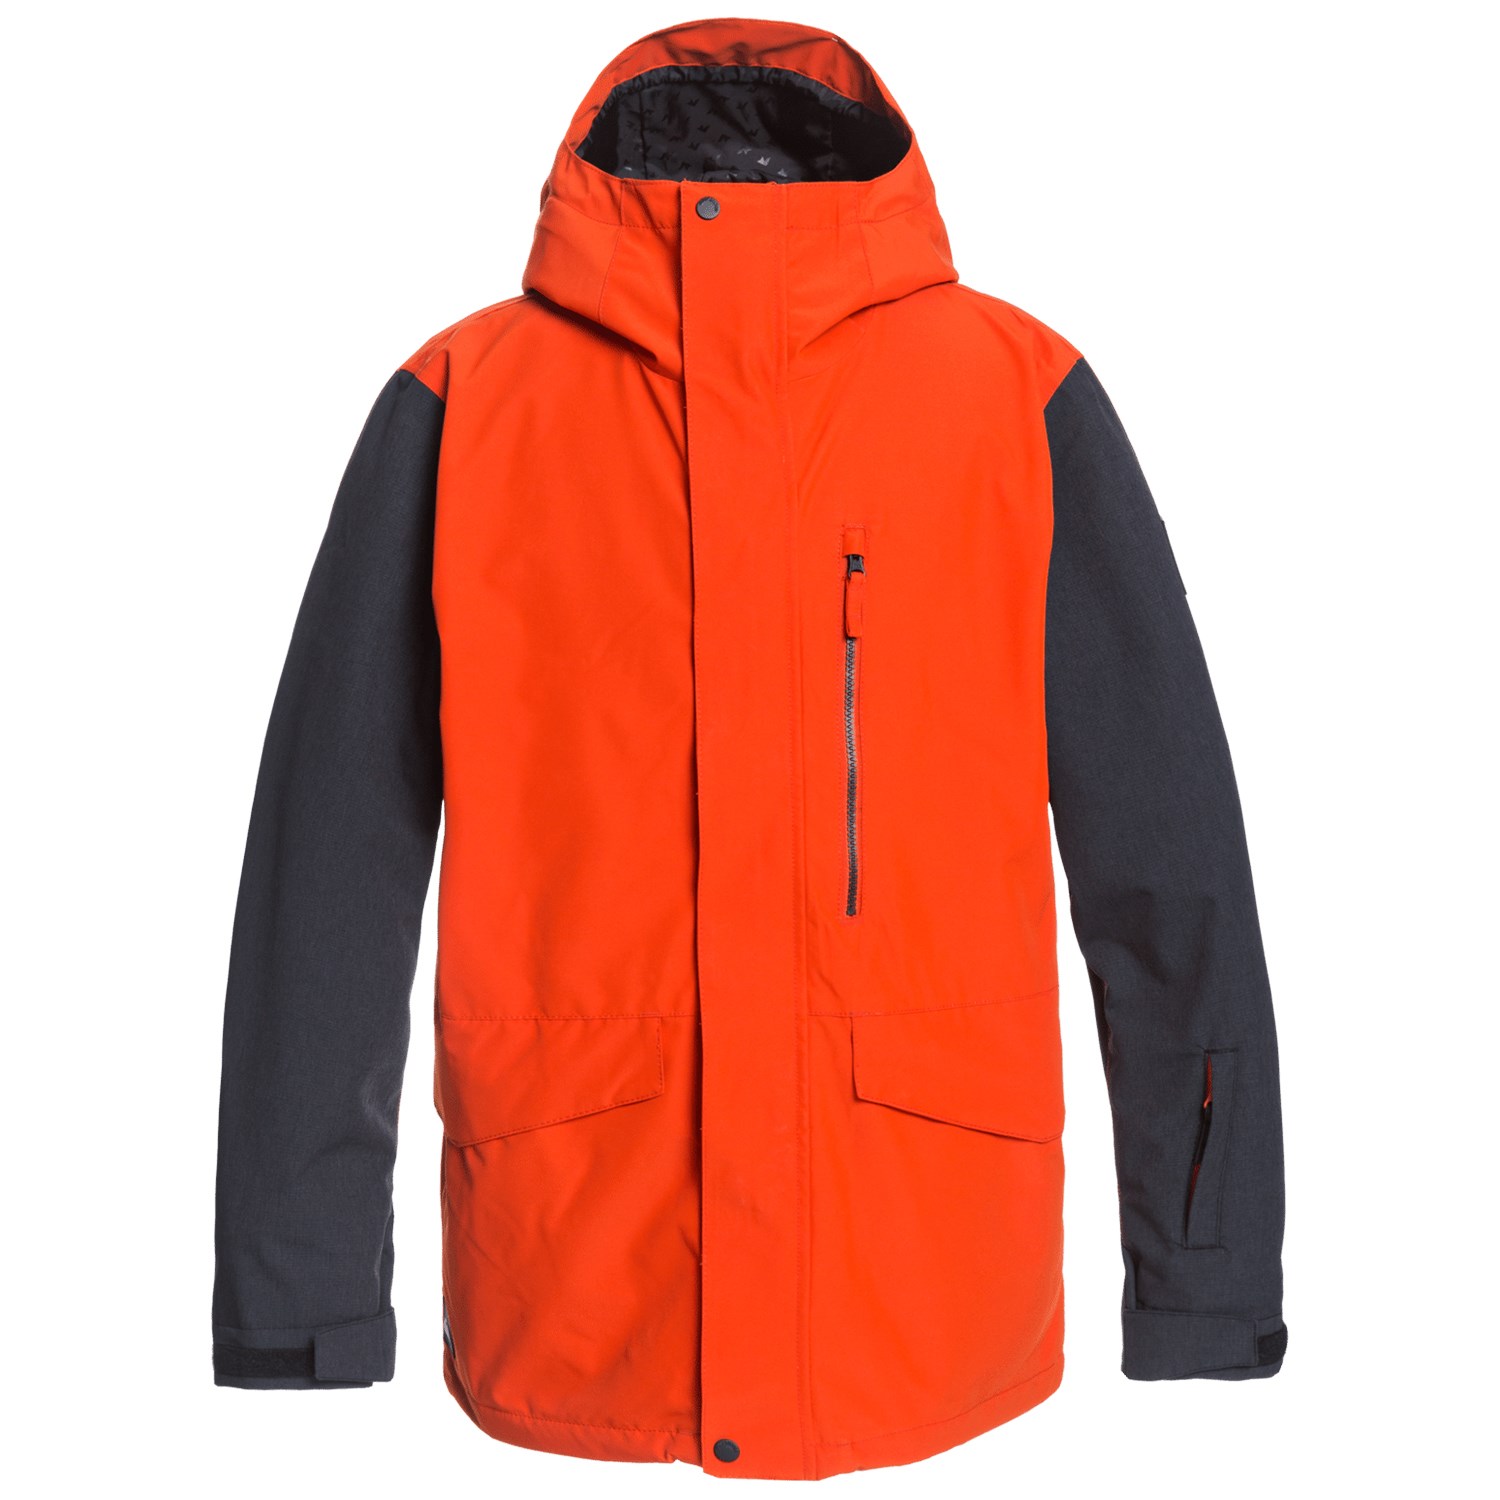 Quiksilver Mission 3-in-1 Jacket | evo